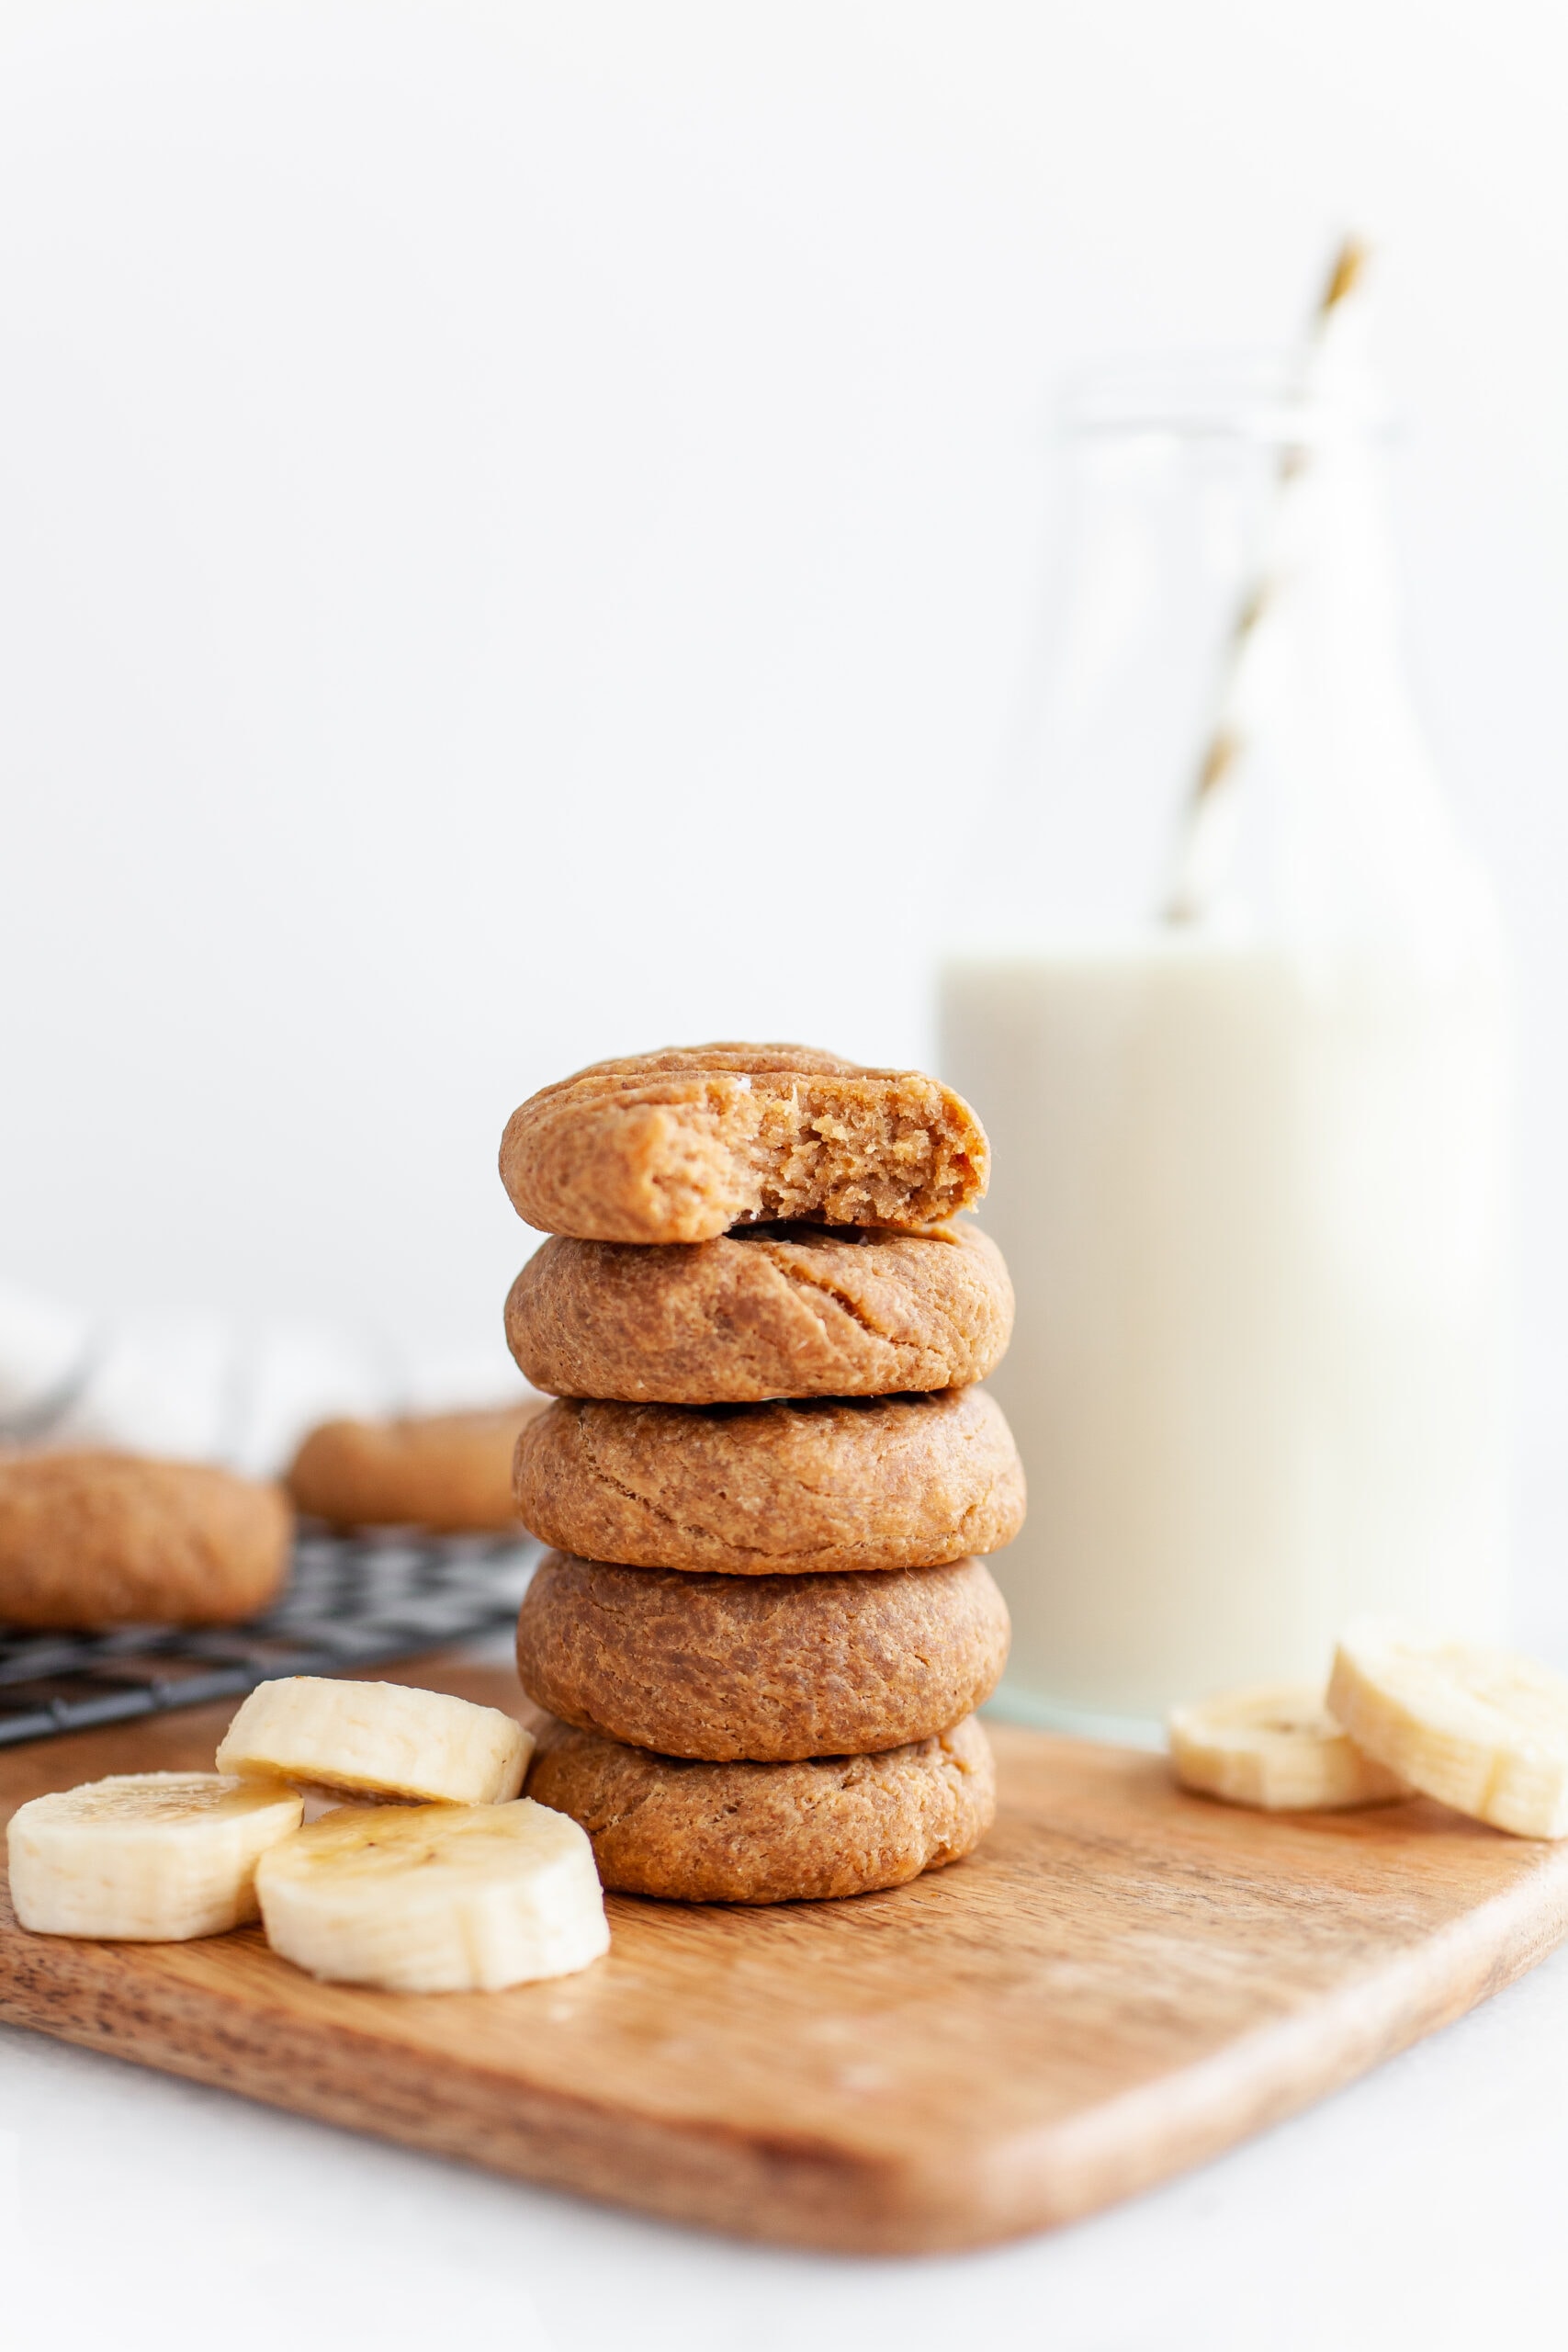 Healthy Peanut Butter Banana Cookies | 4-Ingredients Only!